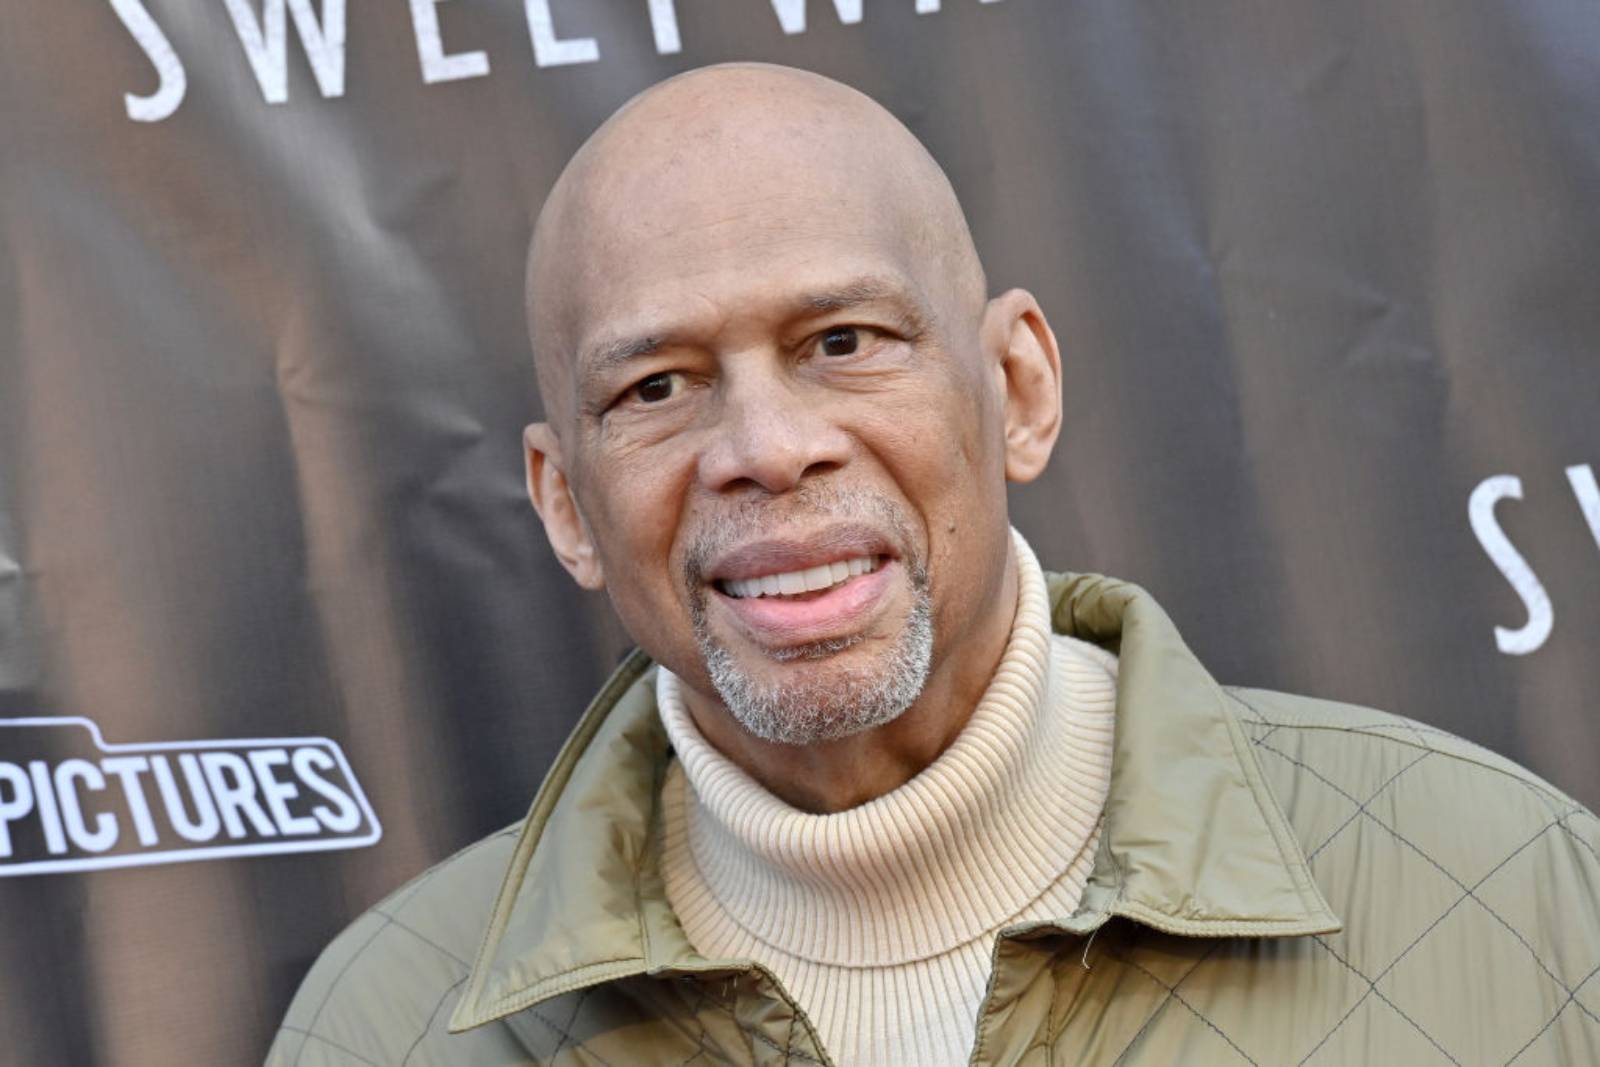  Kareem Abdul-Jabbar attends the Los Angeles Premiere of "Sweetwater" at Steven J. Ross Theatre on the Warner Bros. Lot on April 11, 2023 in Burbank, California. (Photo by Axelle/Bauer-Griffin/FilmMagic)